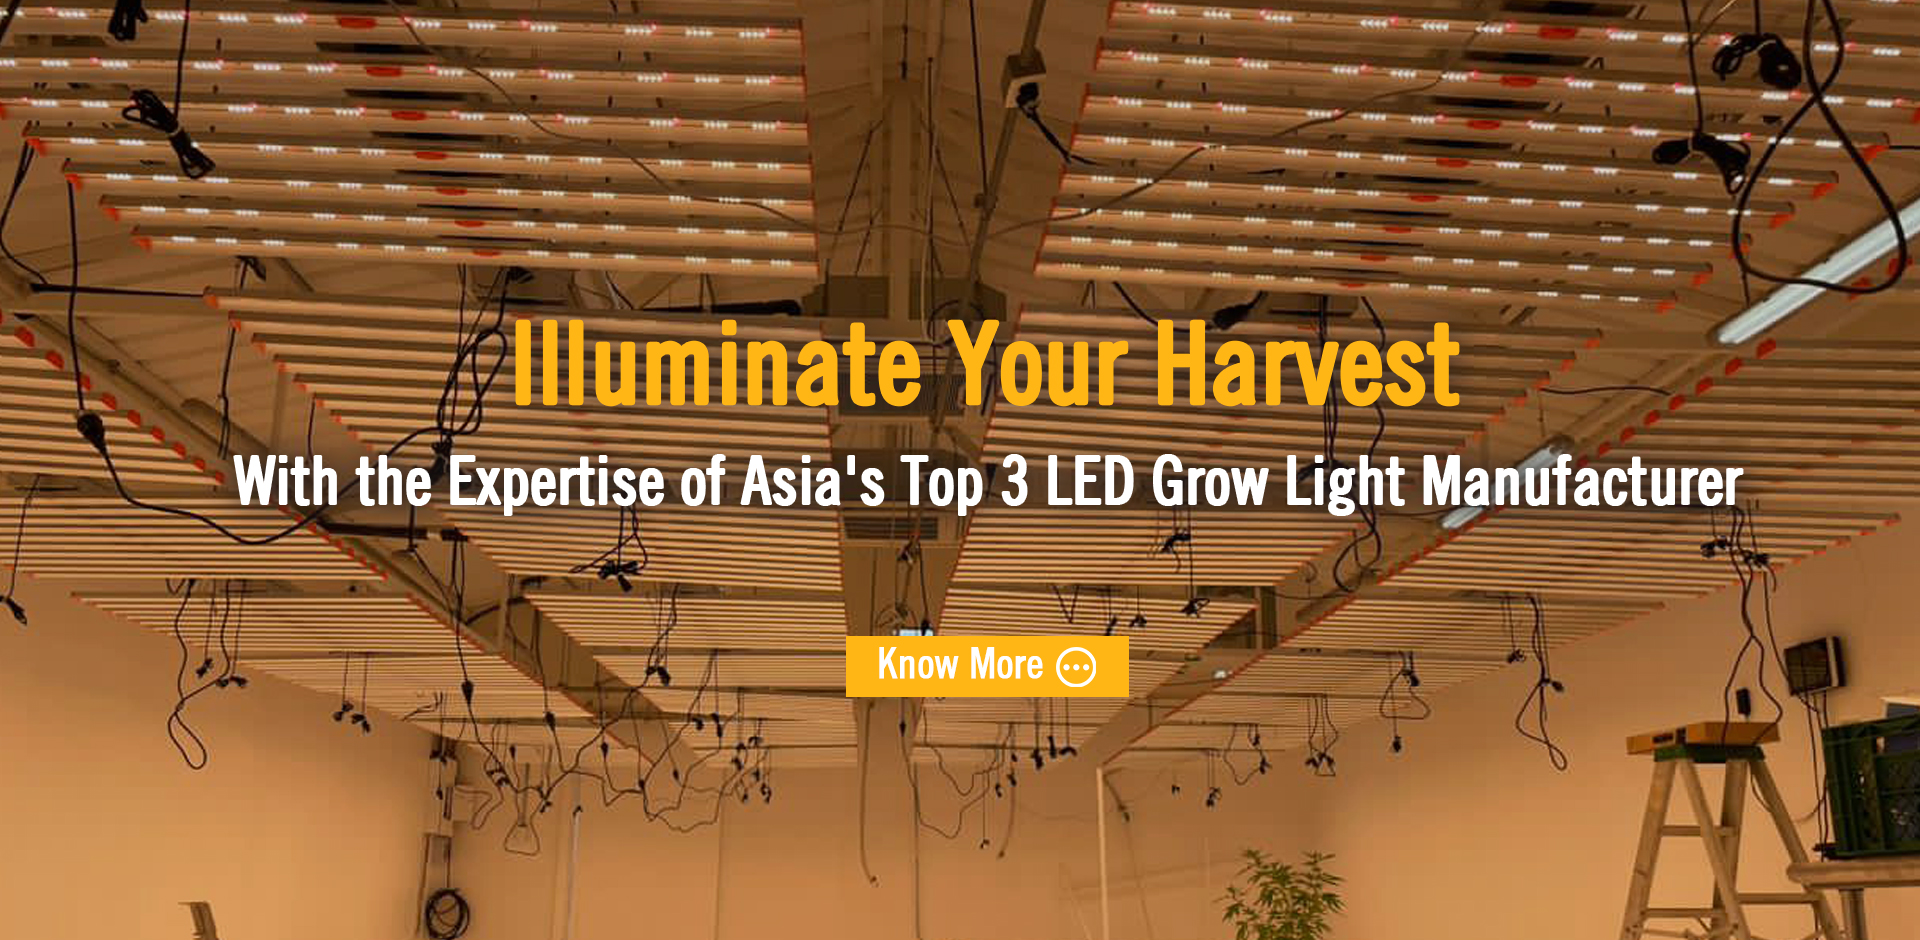 Illuminate Your HarvestWith the Expertise of Asia's Top 3 LED Grow Light Manufacturer